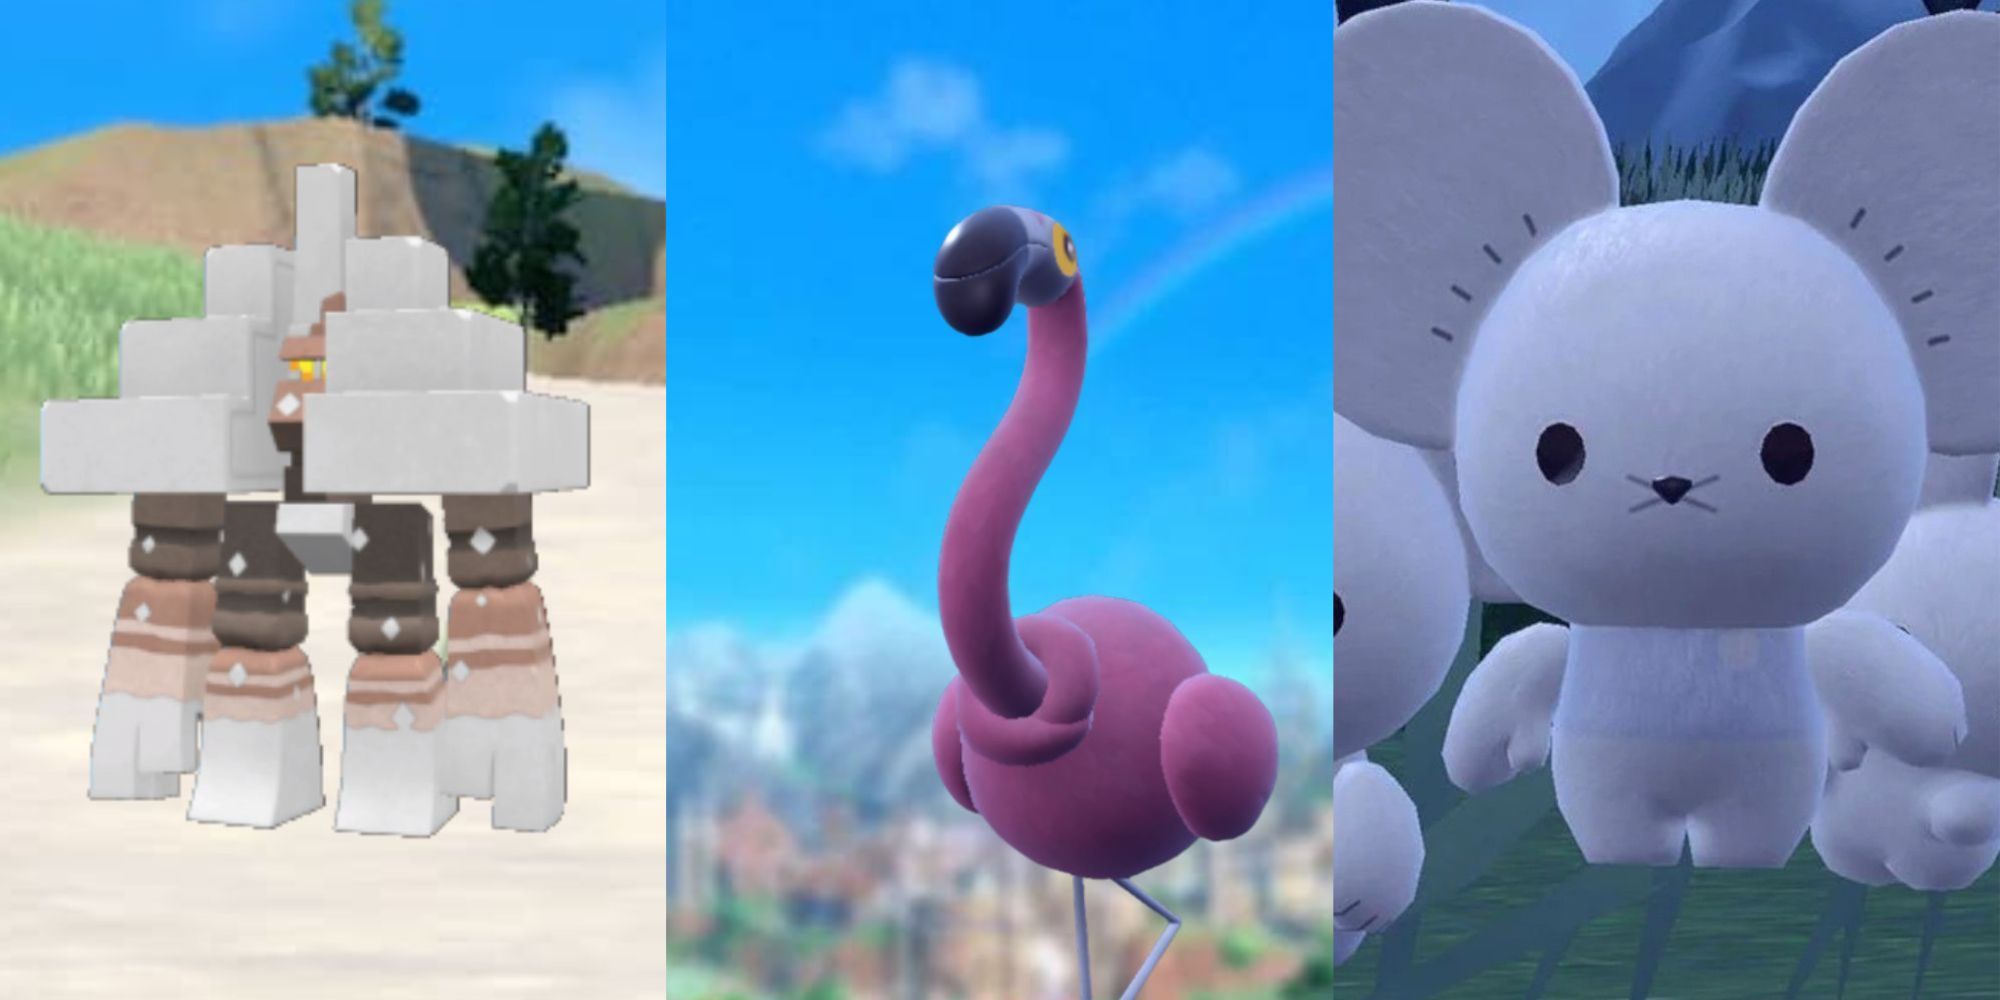 Most Underrated Pokemon: Garganacl, Flamigo, and Maushold ready for battle.